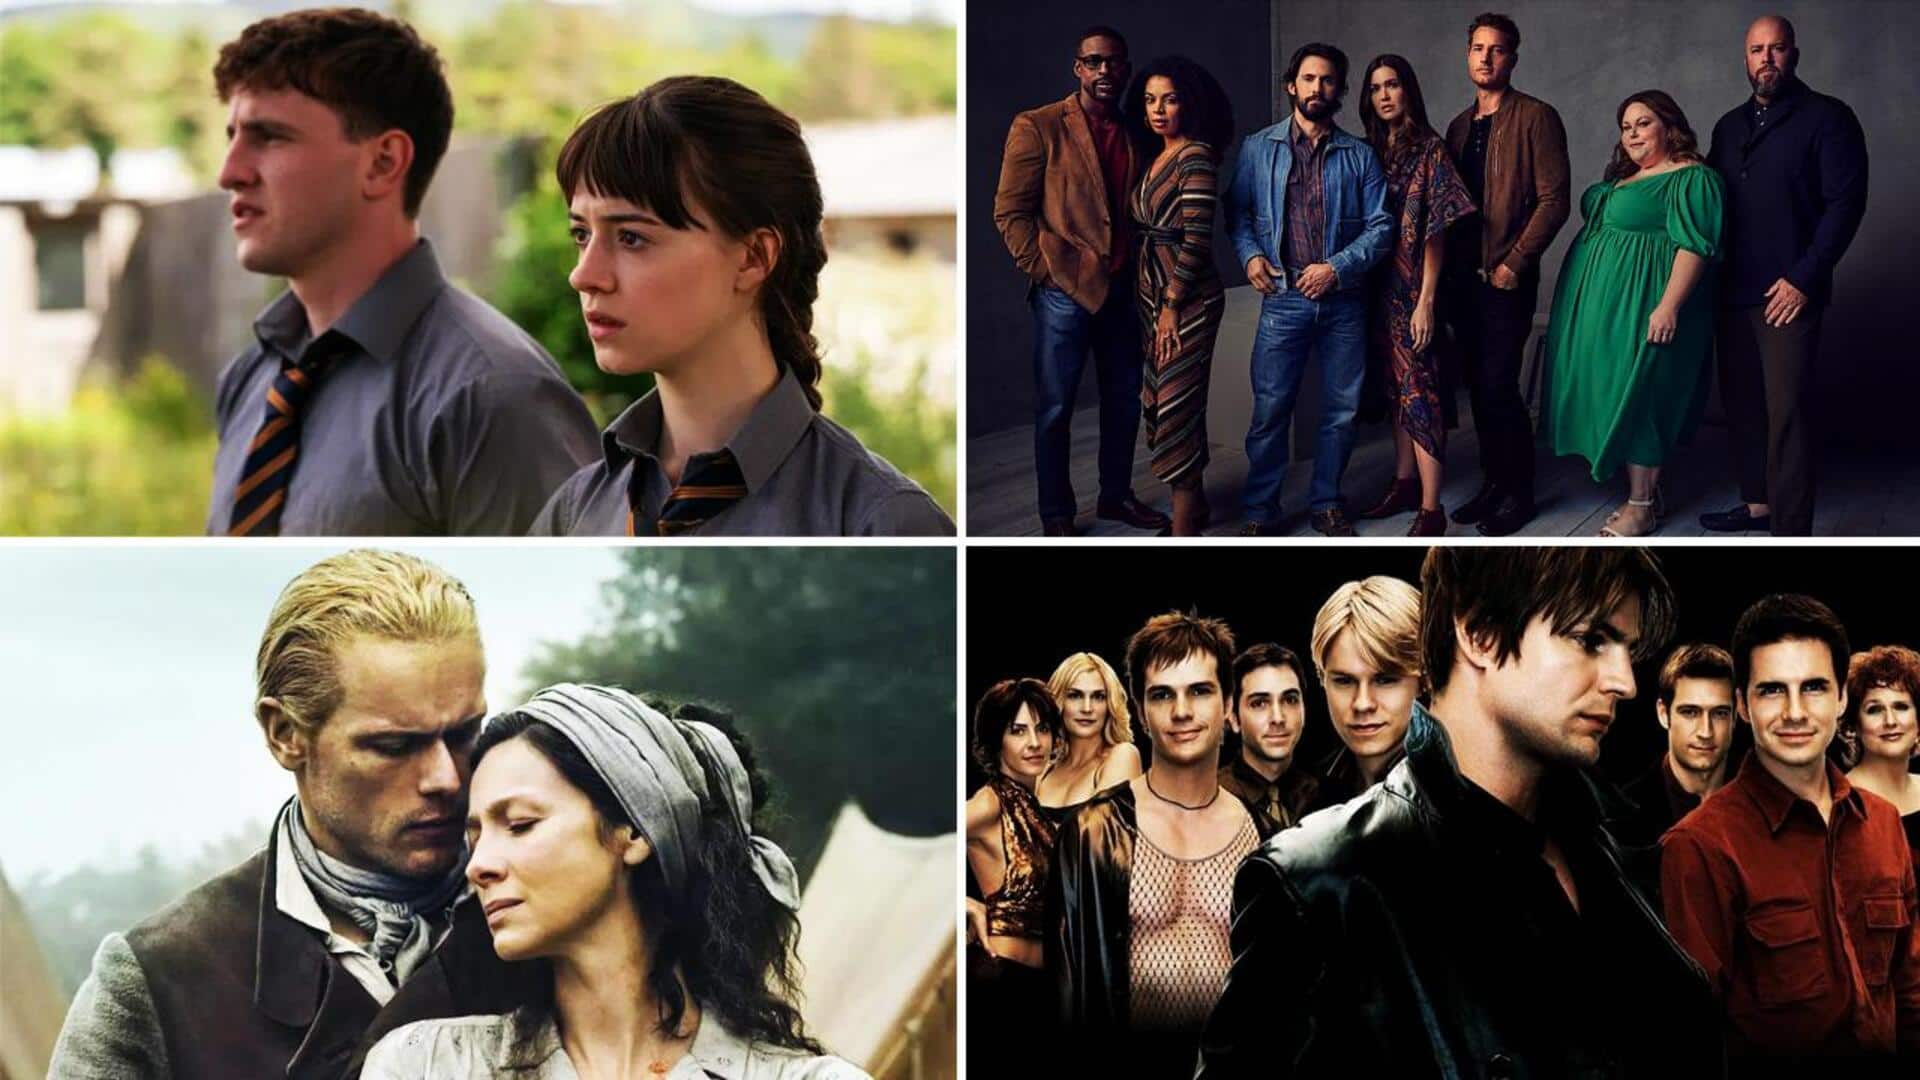 'Pride and Prejudice' to 'Normal People': Best IMDb-rated romantic shows 